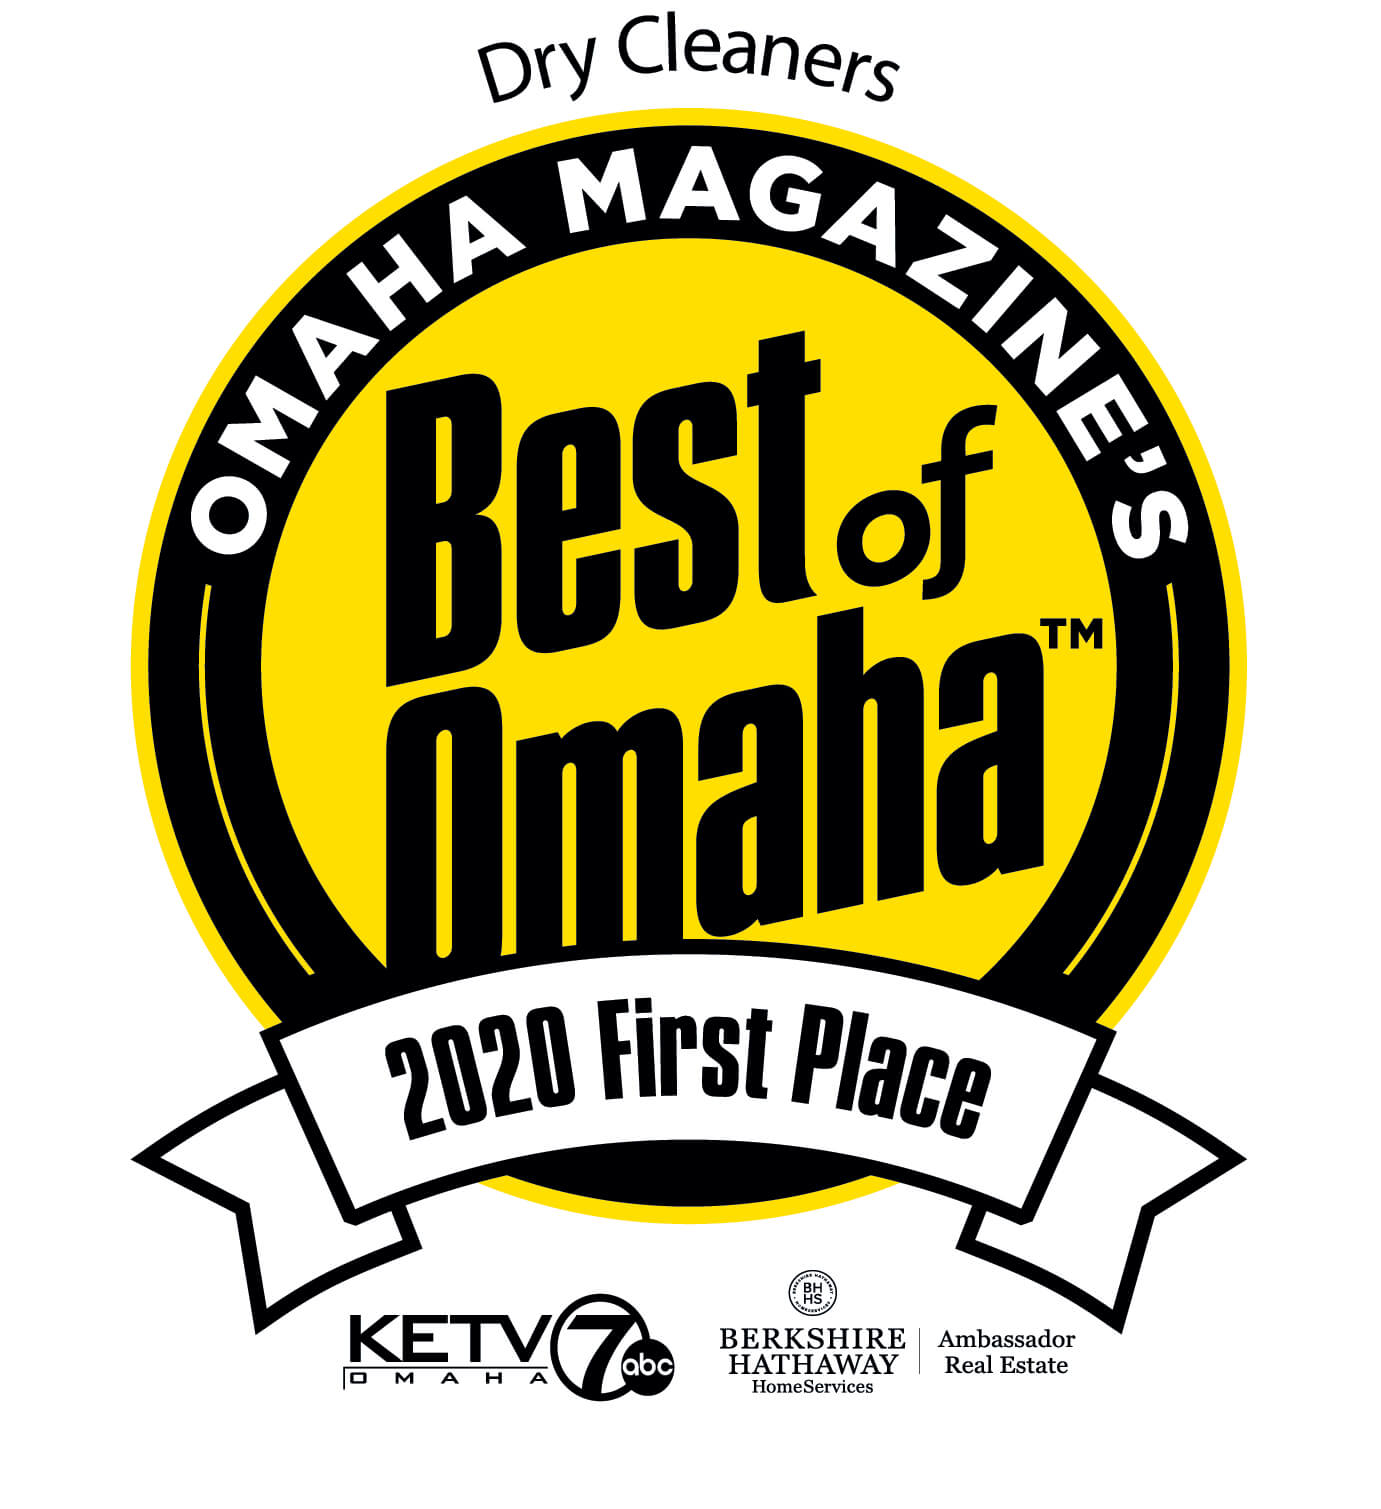 best of omaha dry cleaner 1st place max i walker